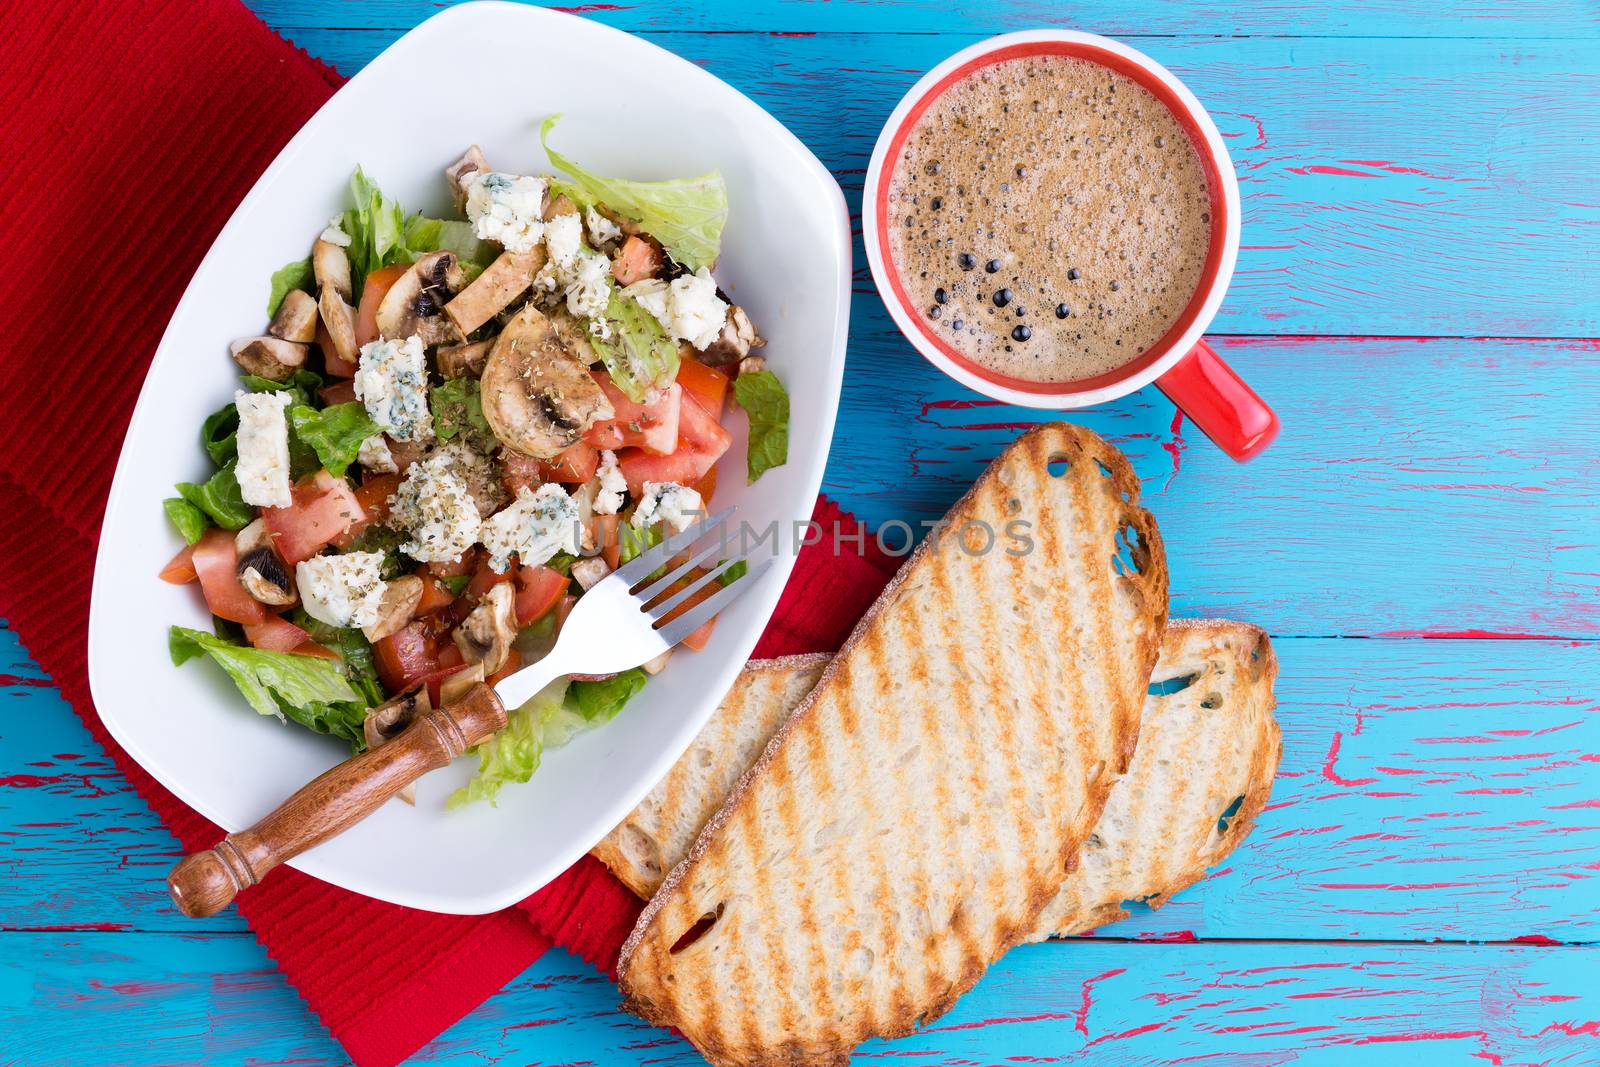 Fresh mixed feta salad on a platter served with frothy espresso coffee and toasted baguette on a colorful tropical blue picnic table with copy space viewed from above